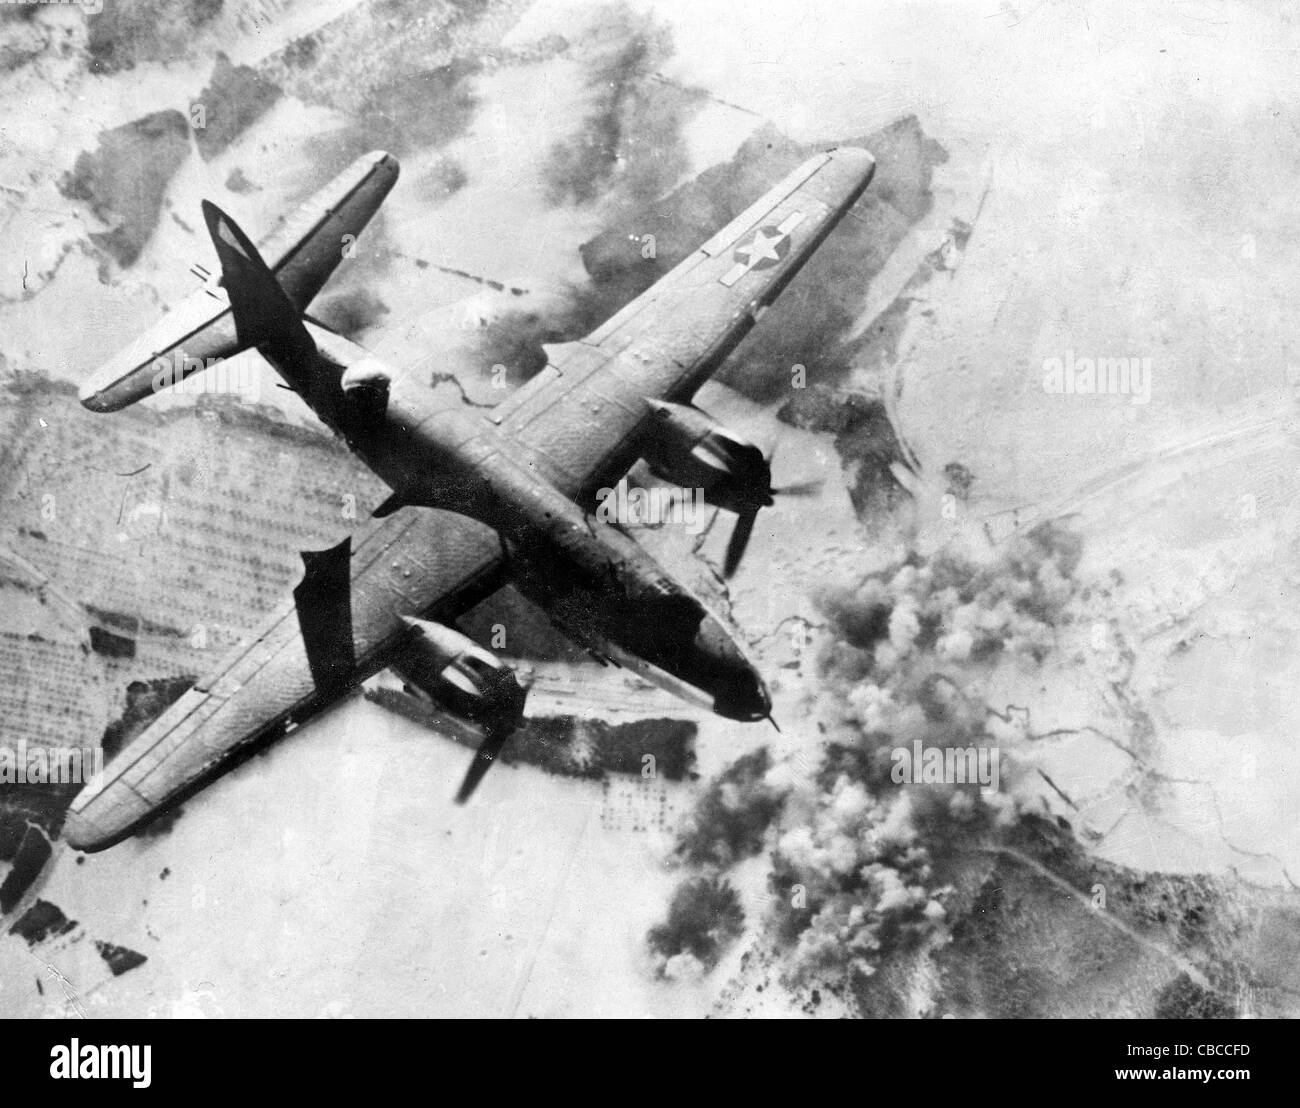 A 9th Air Force B26 Marauder bombing a bridge in Germany during WW11. Stock Photo